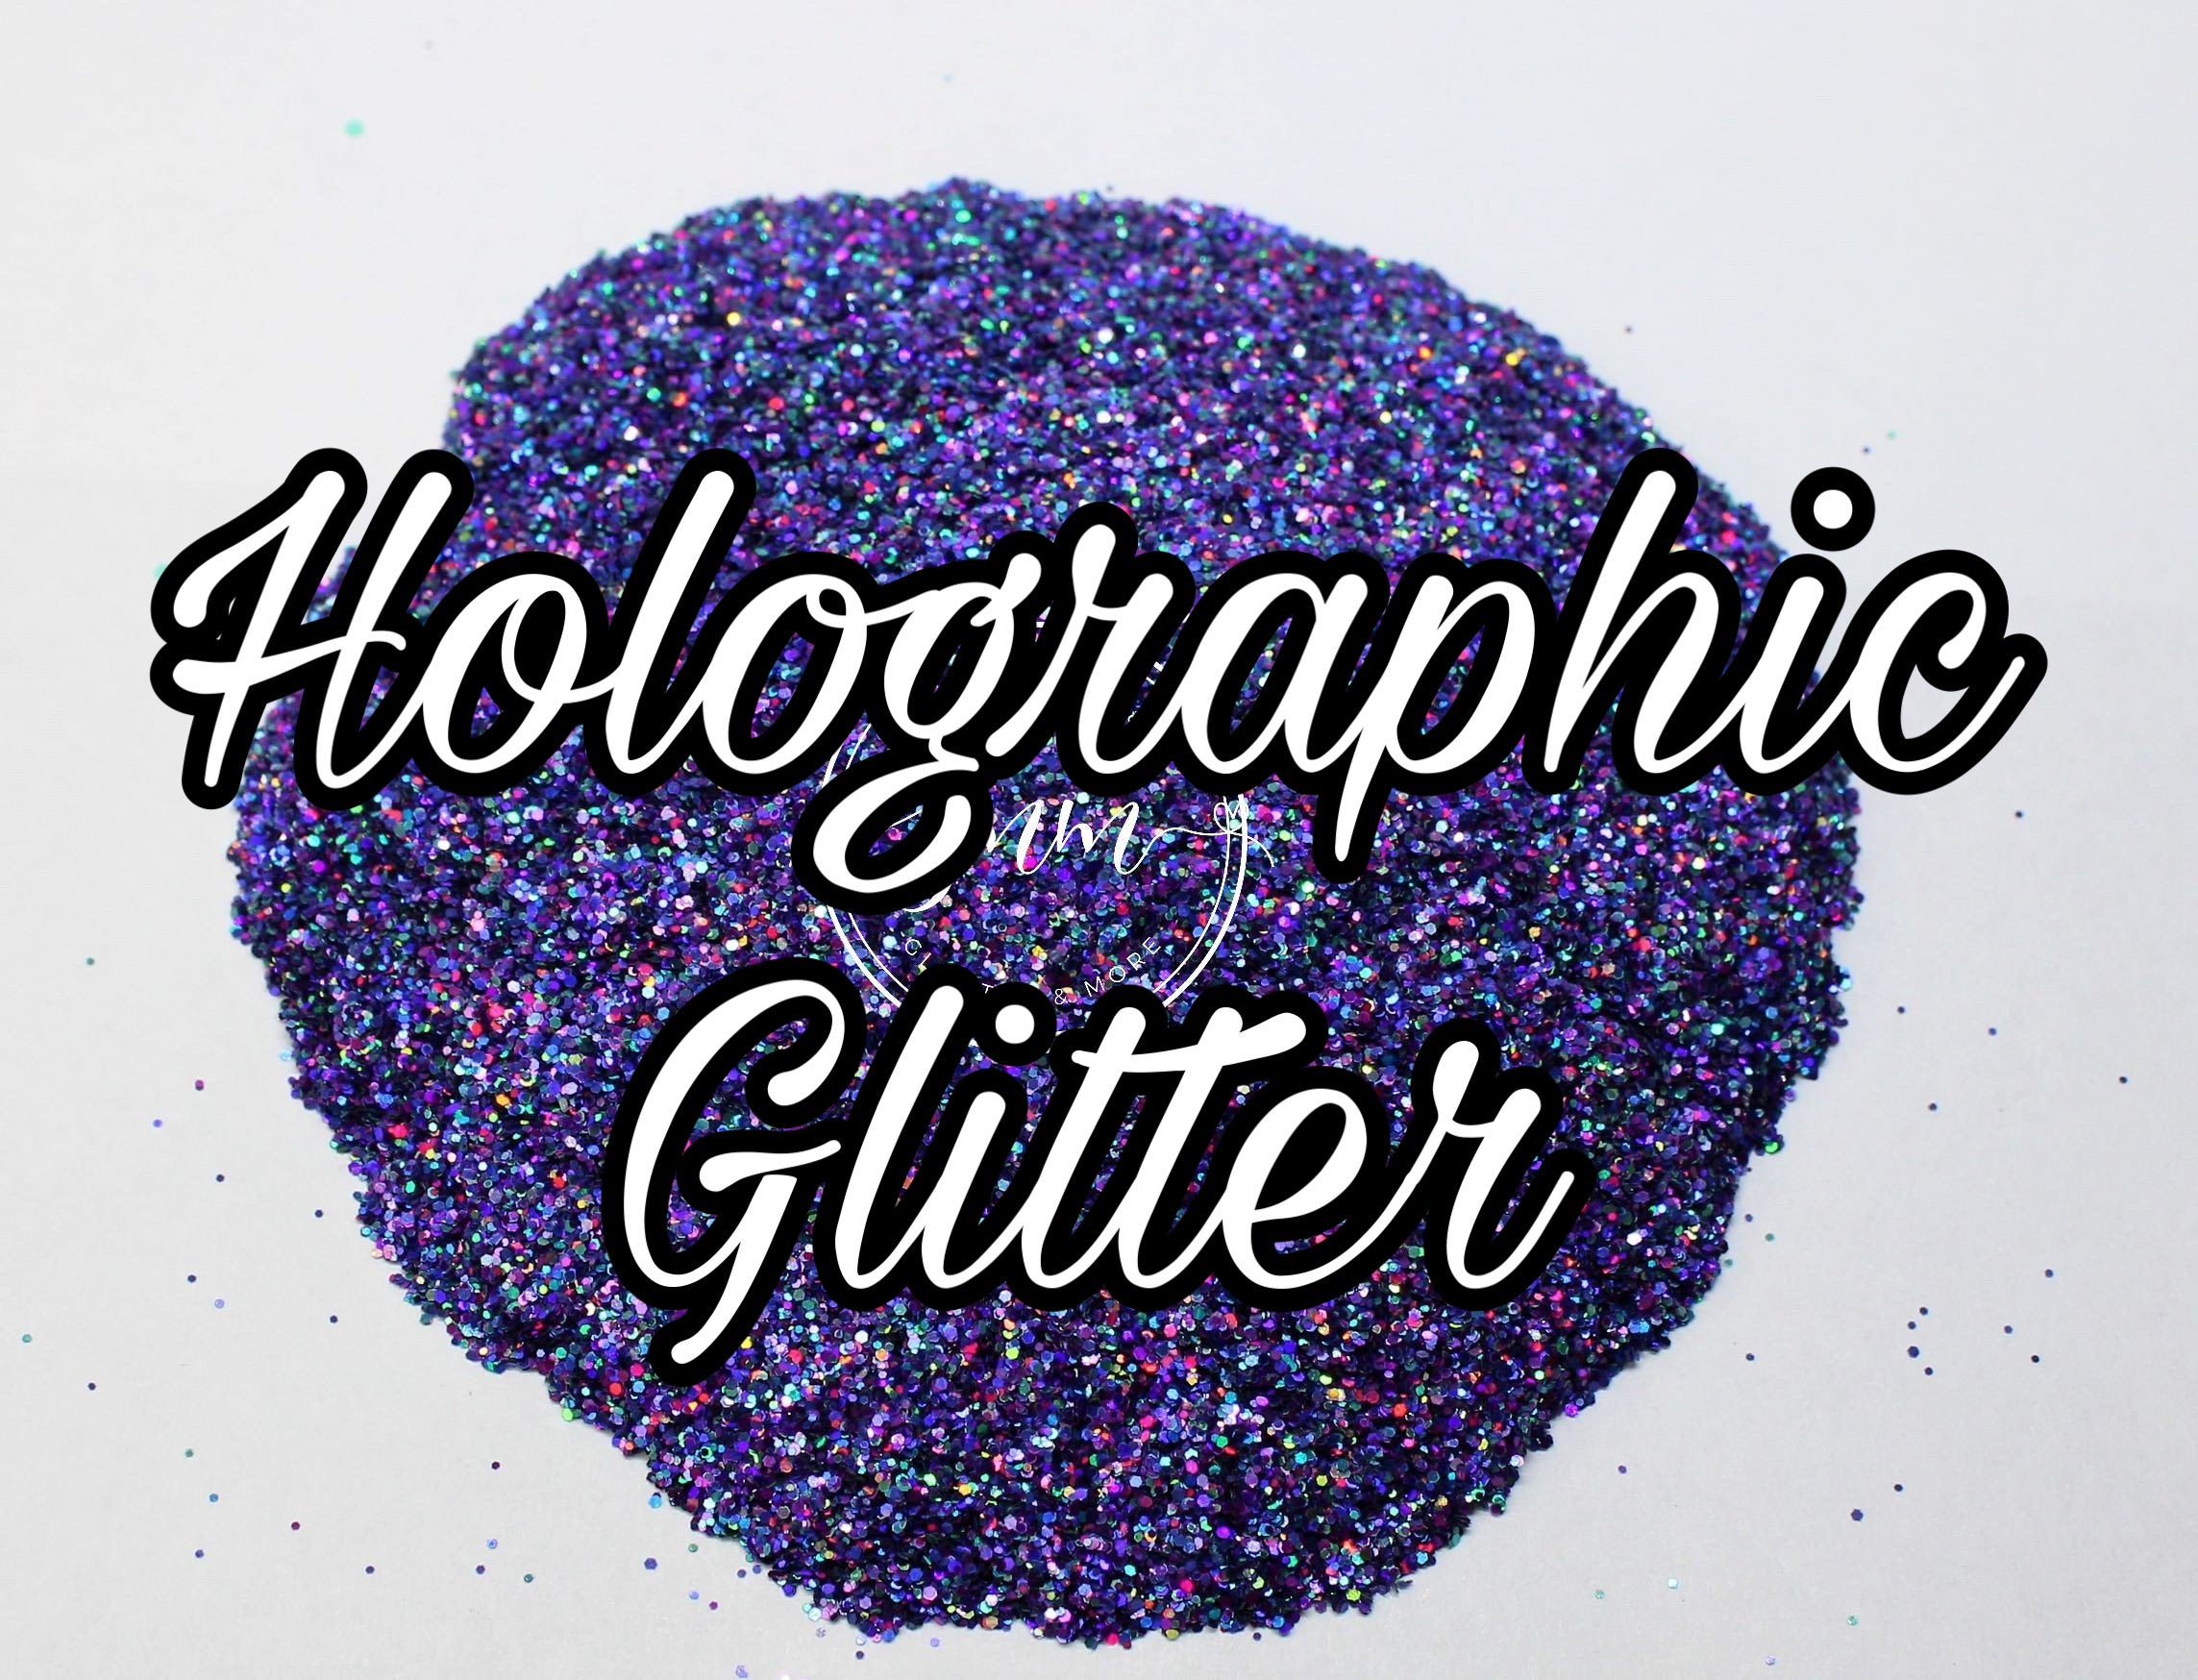 Laser Red ultra Fine Holographic – Sparkly MeMaw LLC